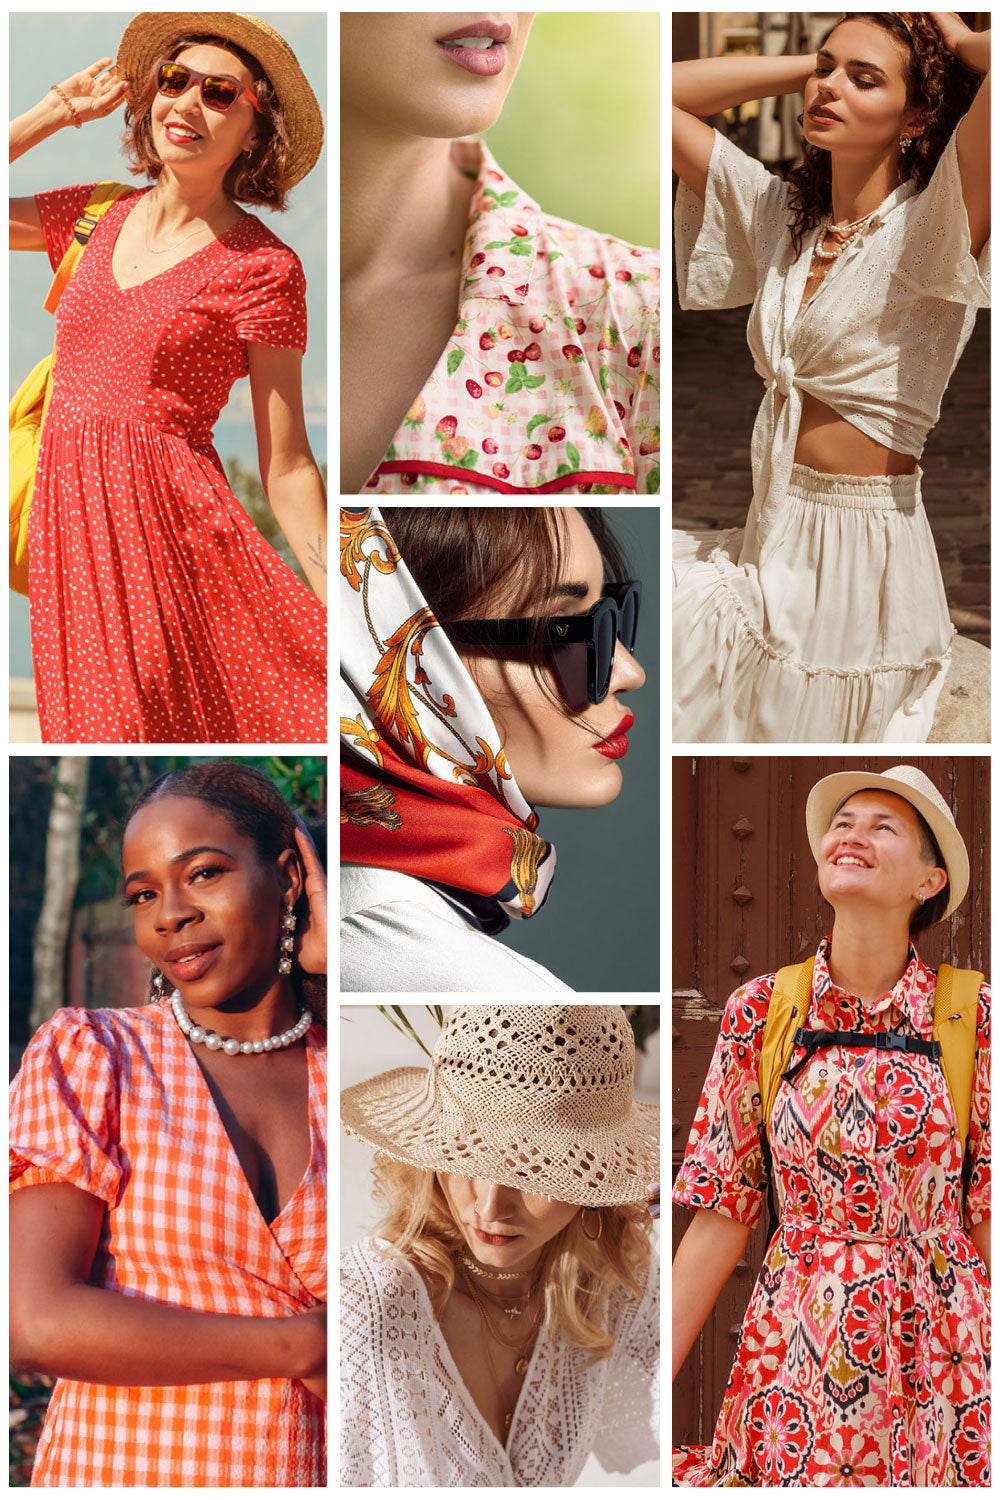 Collage of images of women wearing red and white dresses and shirts in the tomato girl style